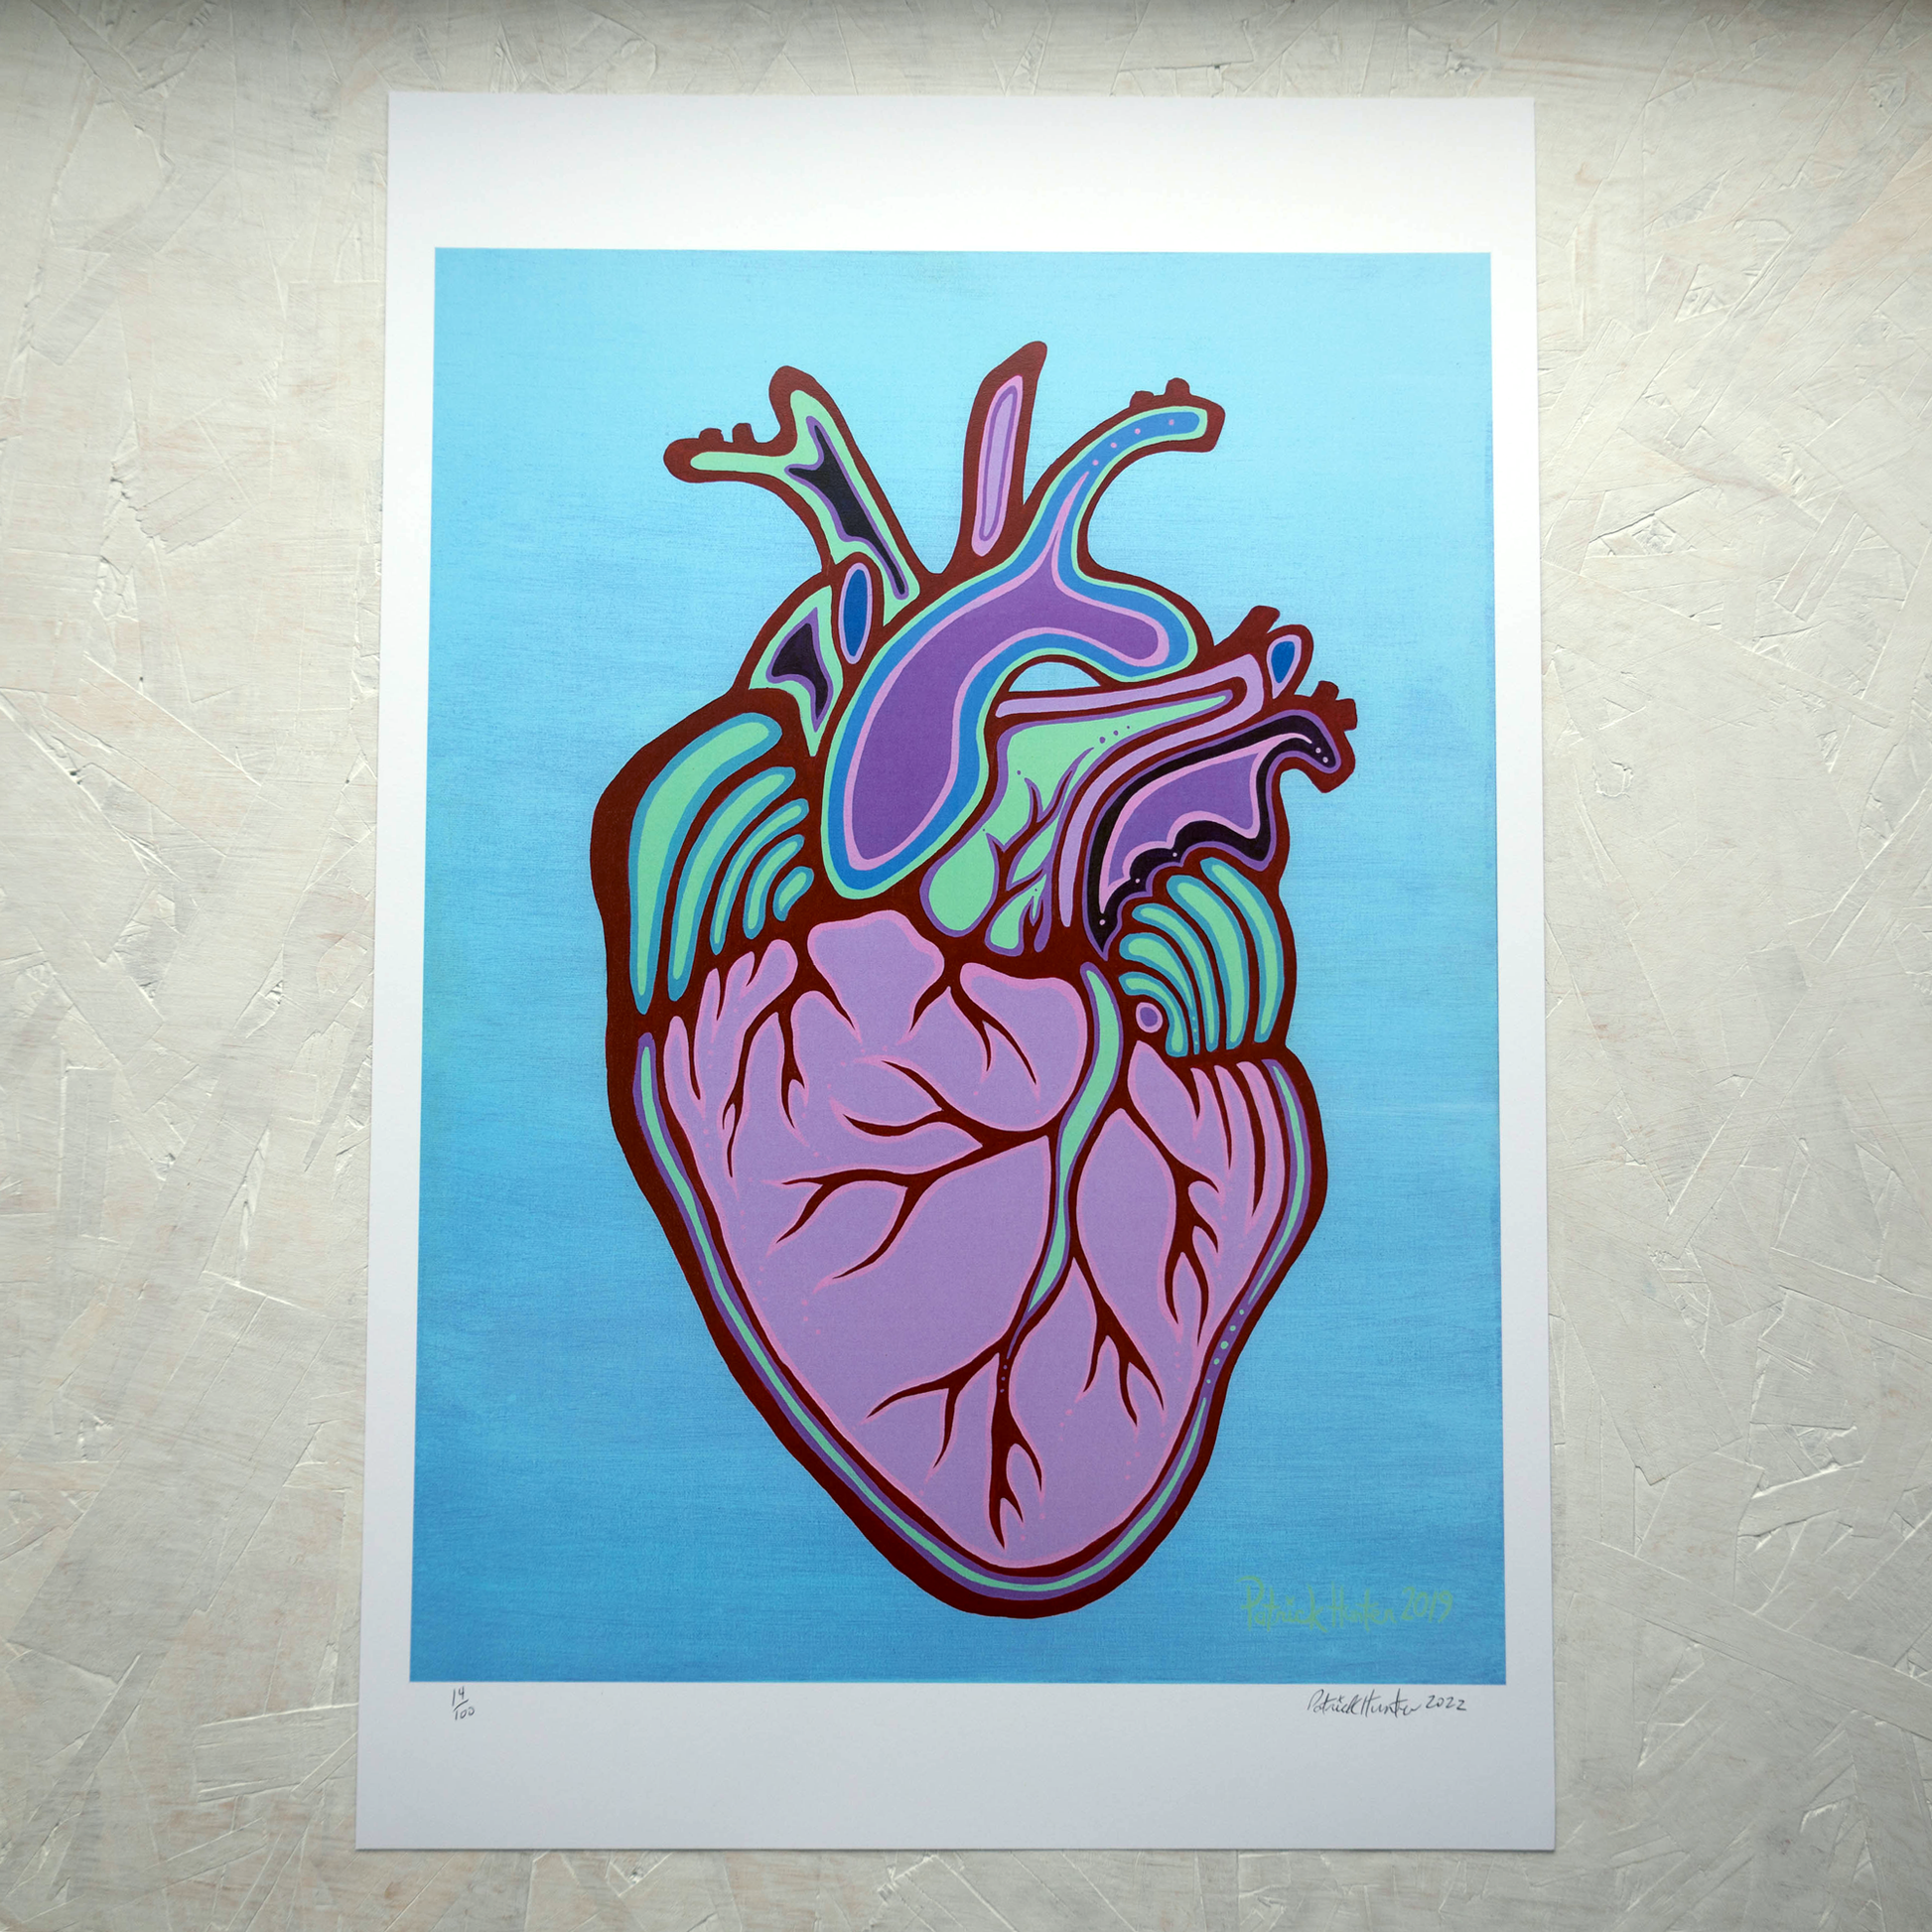 Print of Patrick Hunter's painting of an anatomical heart on blue background, woodland art style.